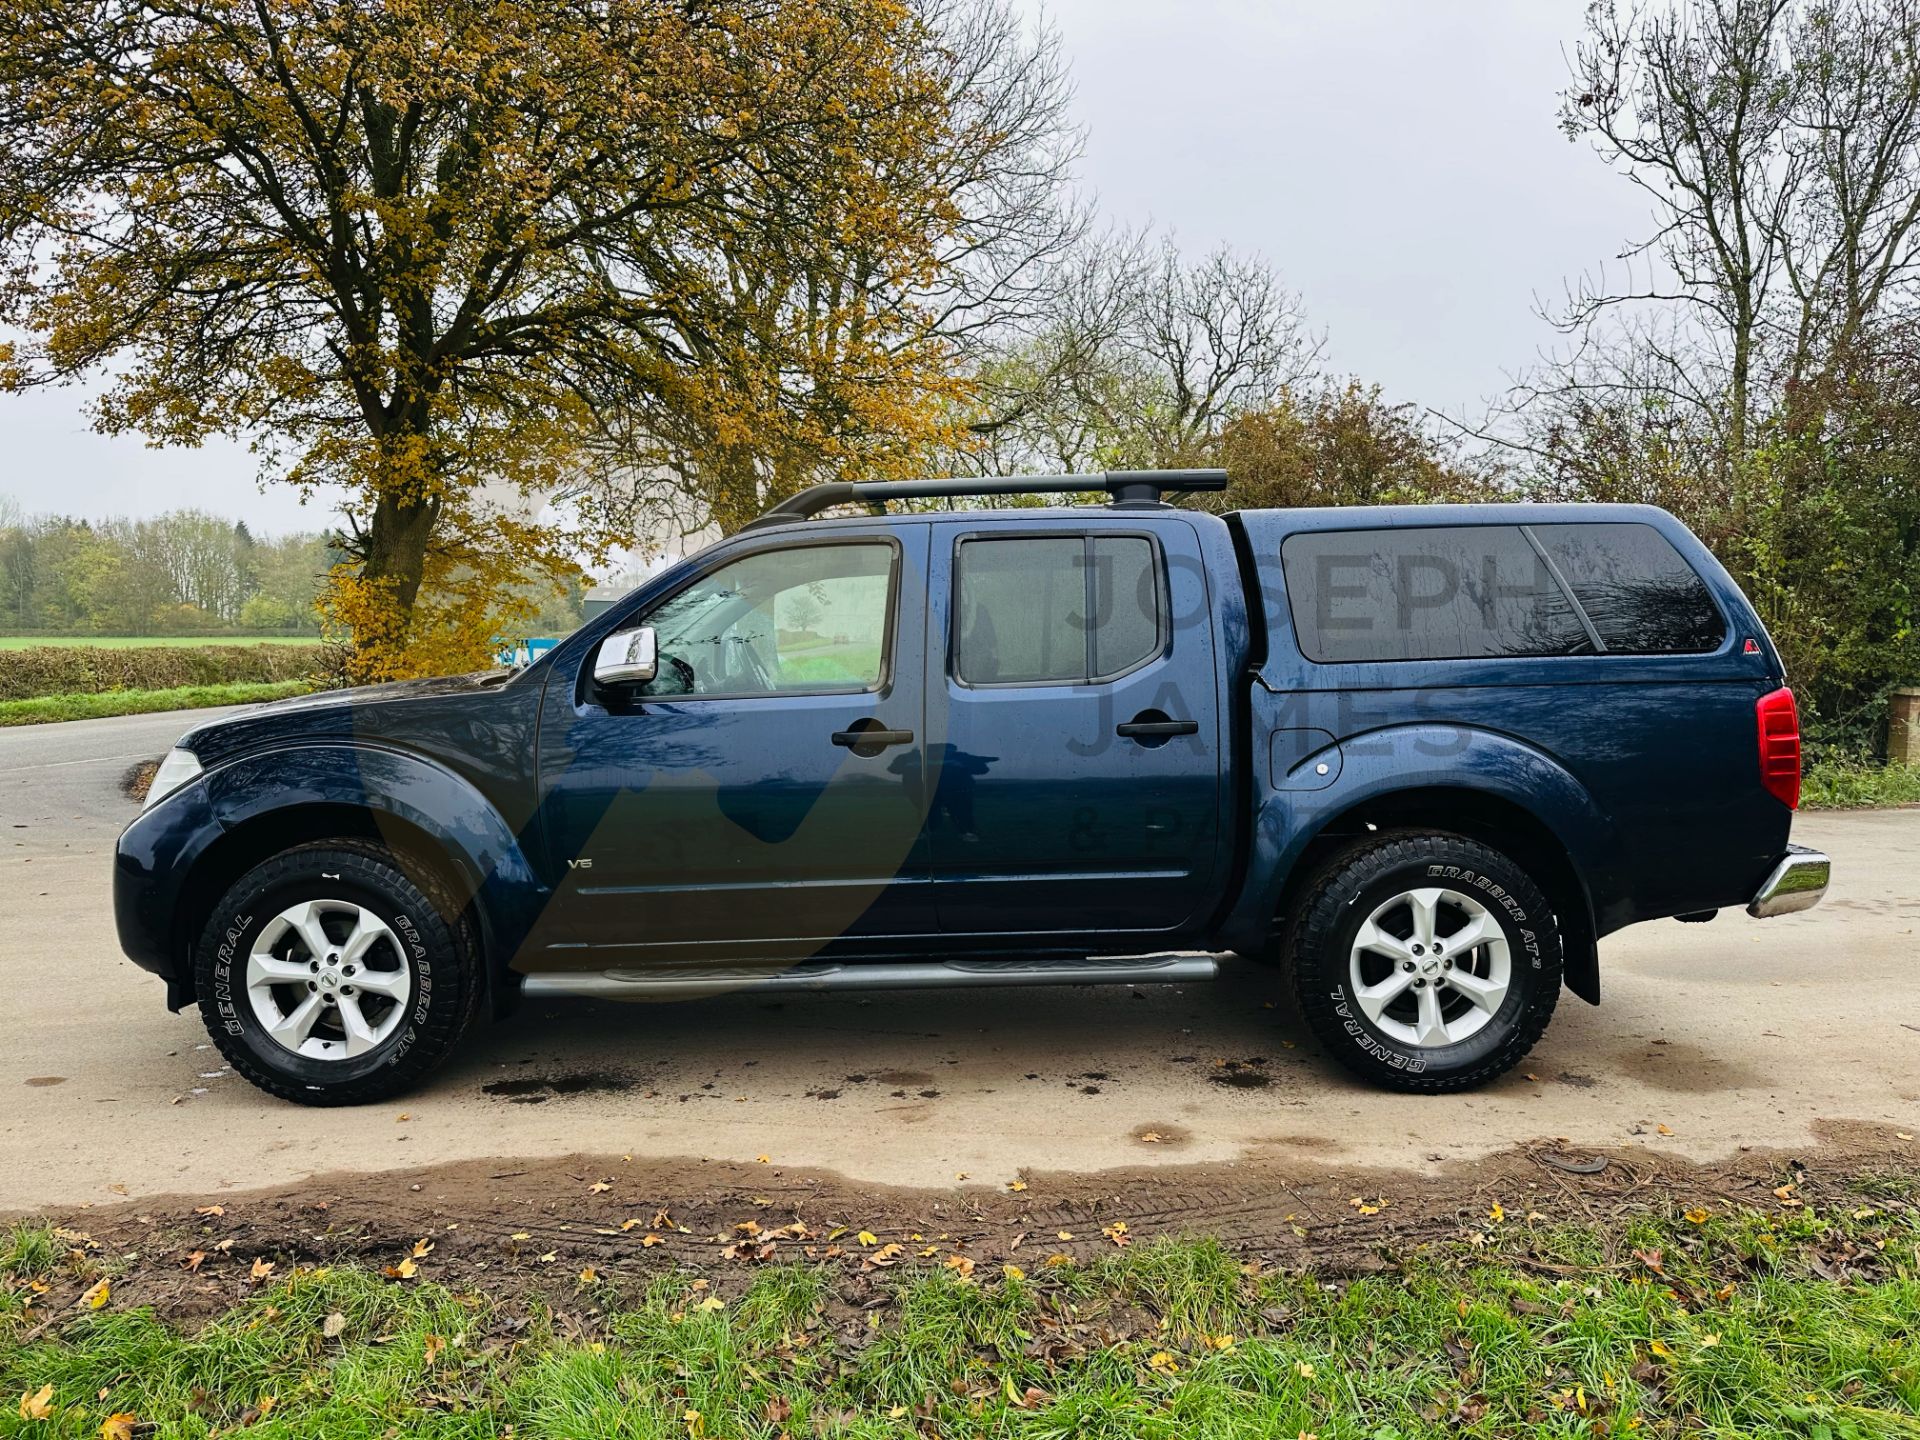 (ON SALE)NISSAN NAVARA *OUTLAW EDITION* 3.0 V6 TURBO DIESEL AUTOMATIC DOUBLE CAB PICKUP - 11 REG - Image 10 of 43